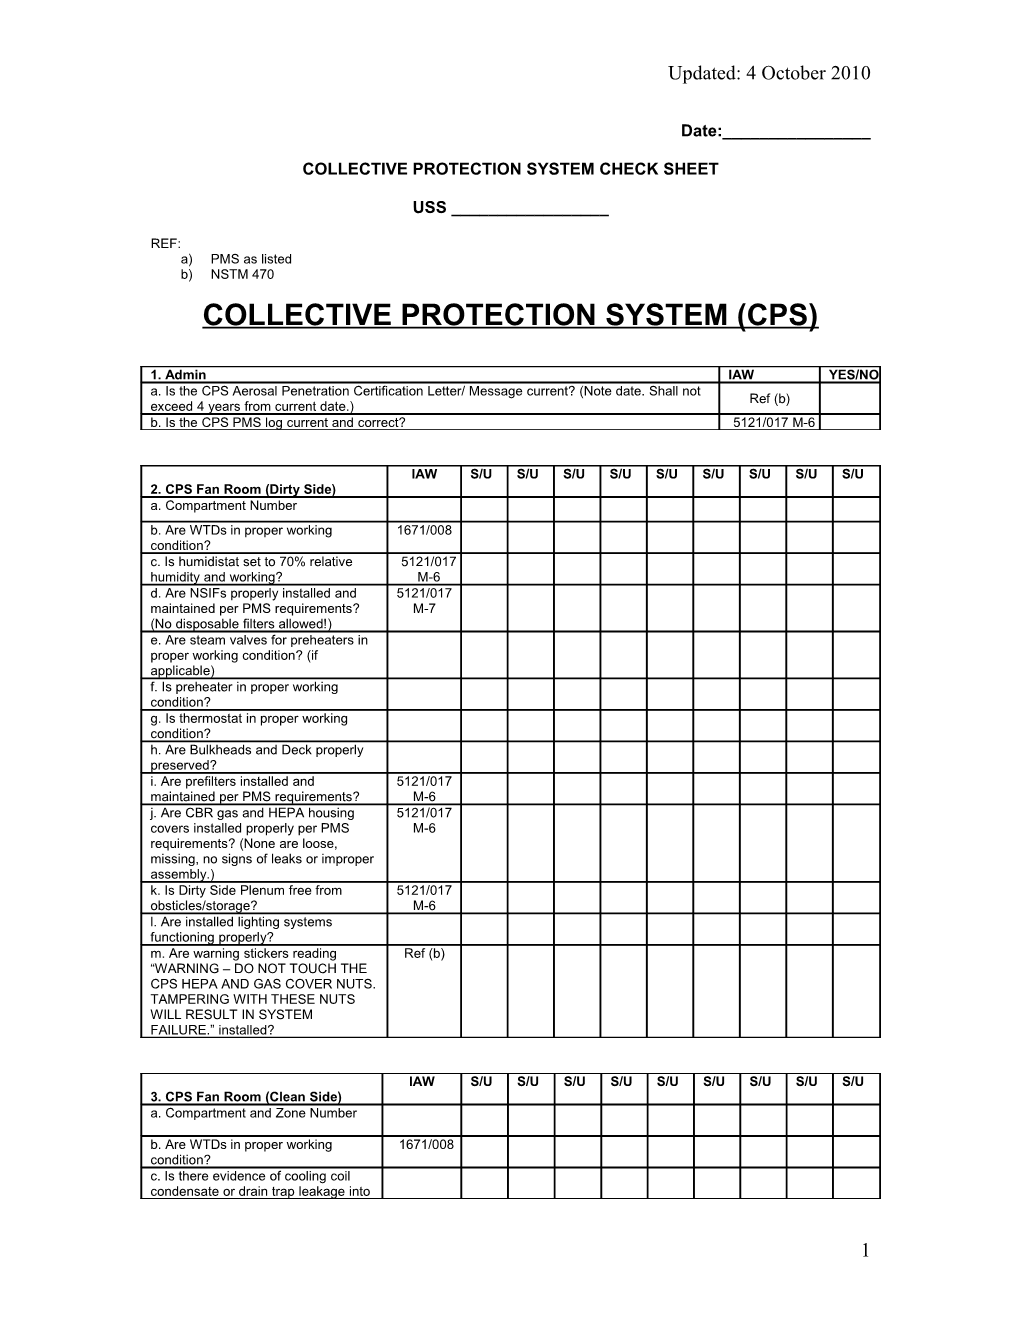 Collective Protection System Check Sheet